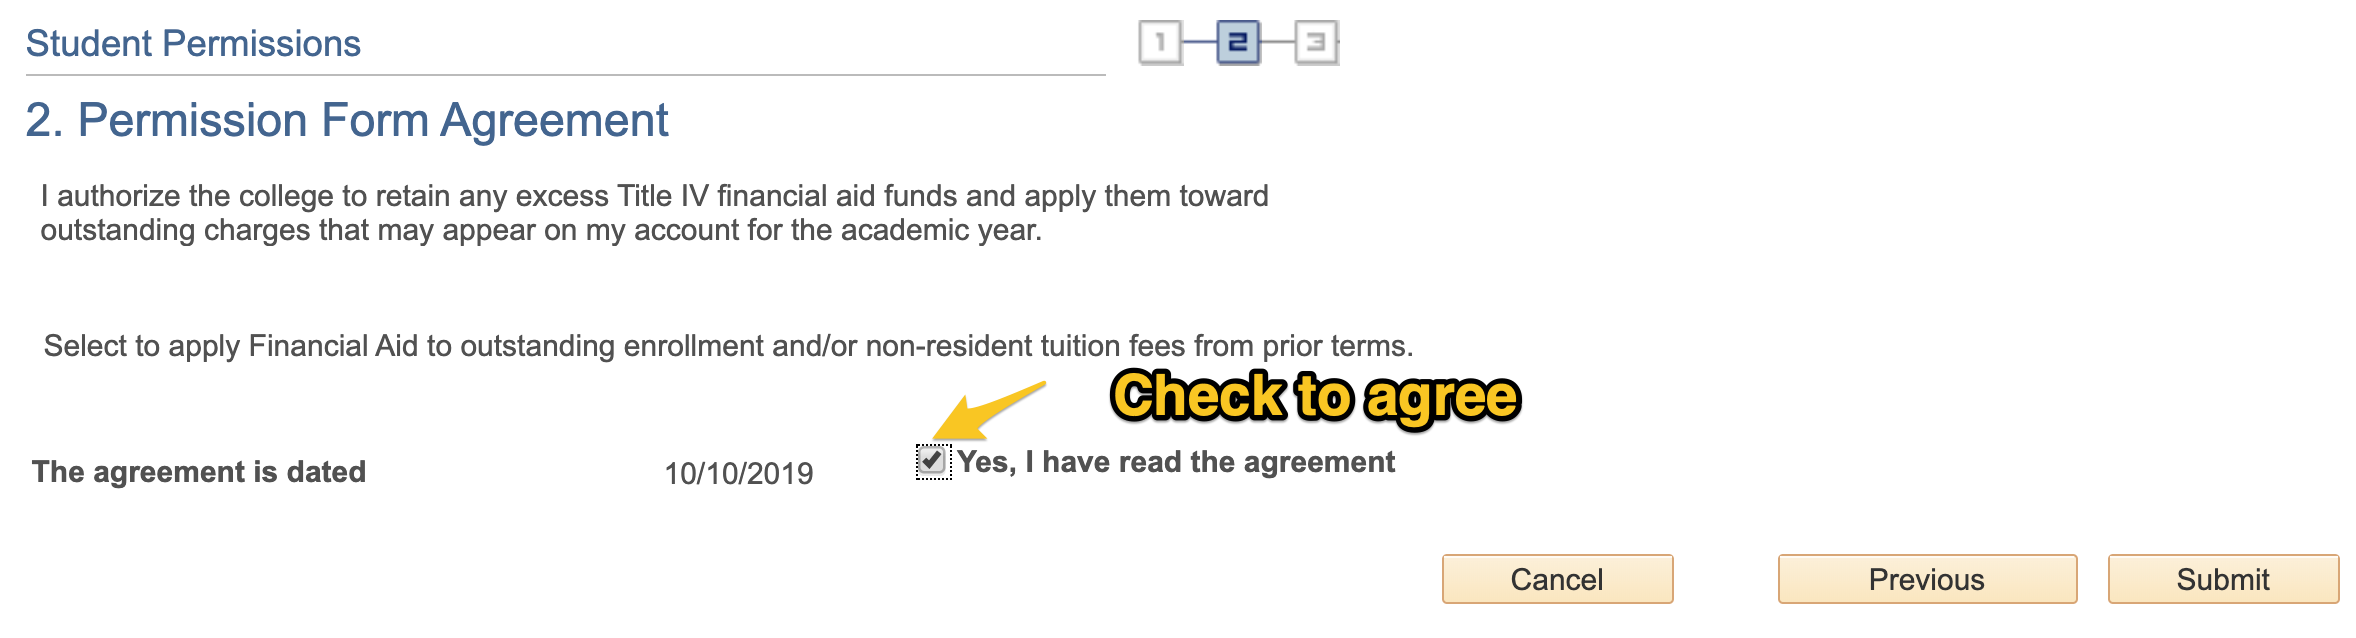 The Permission Form Agreement will load. Check the agreement checkbox and click Submit.